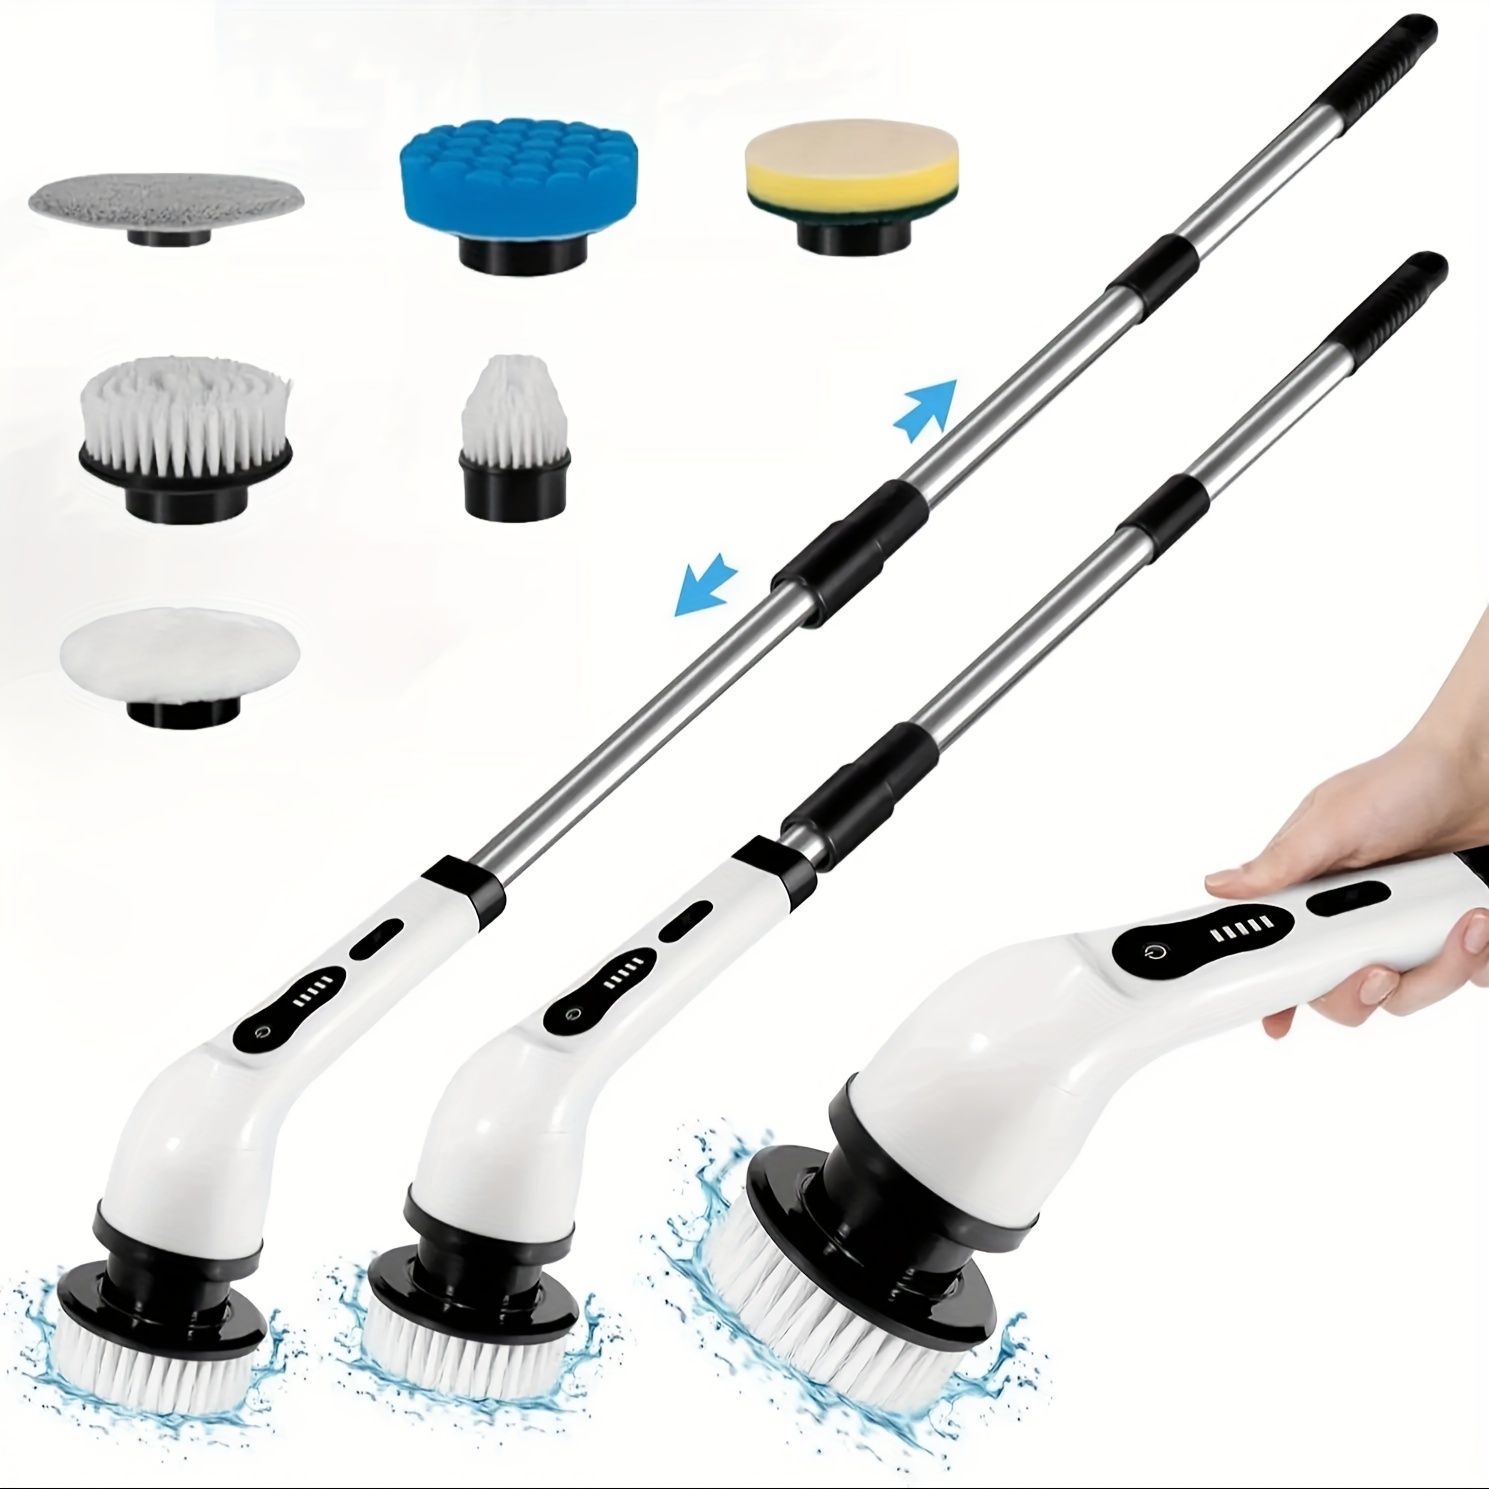 10pack IAGREEA Electric Spin Scrubber, Power Shower Scrubber With  Replaceable Brush Headand Adjustable Extension Handle, 360 Cordless  Cleaning Brush F